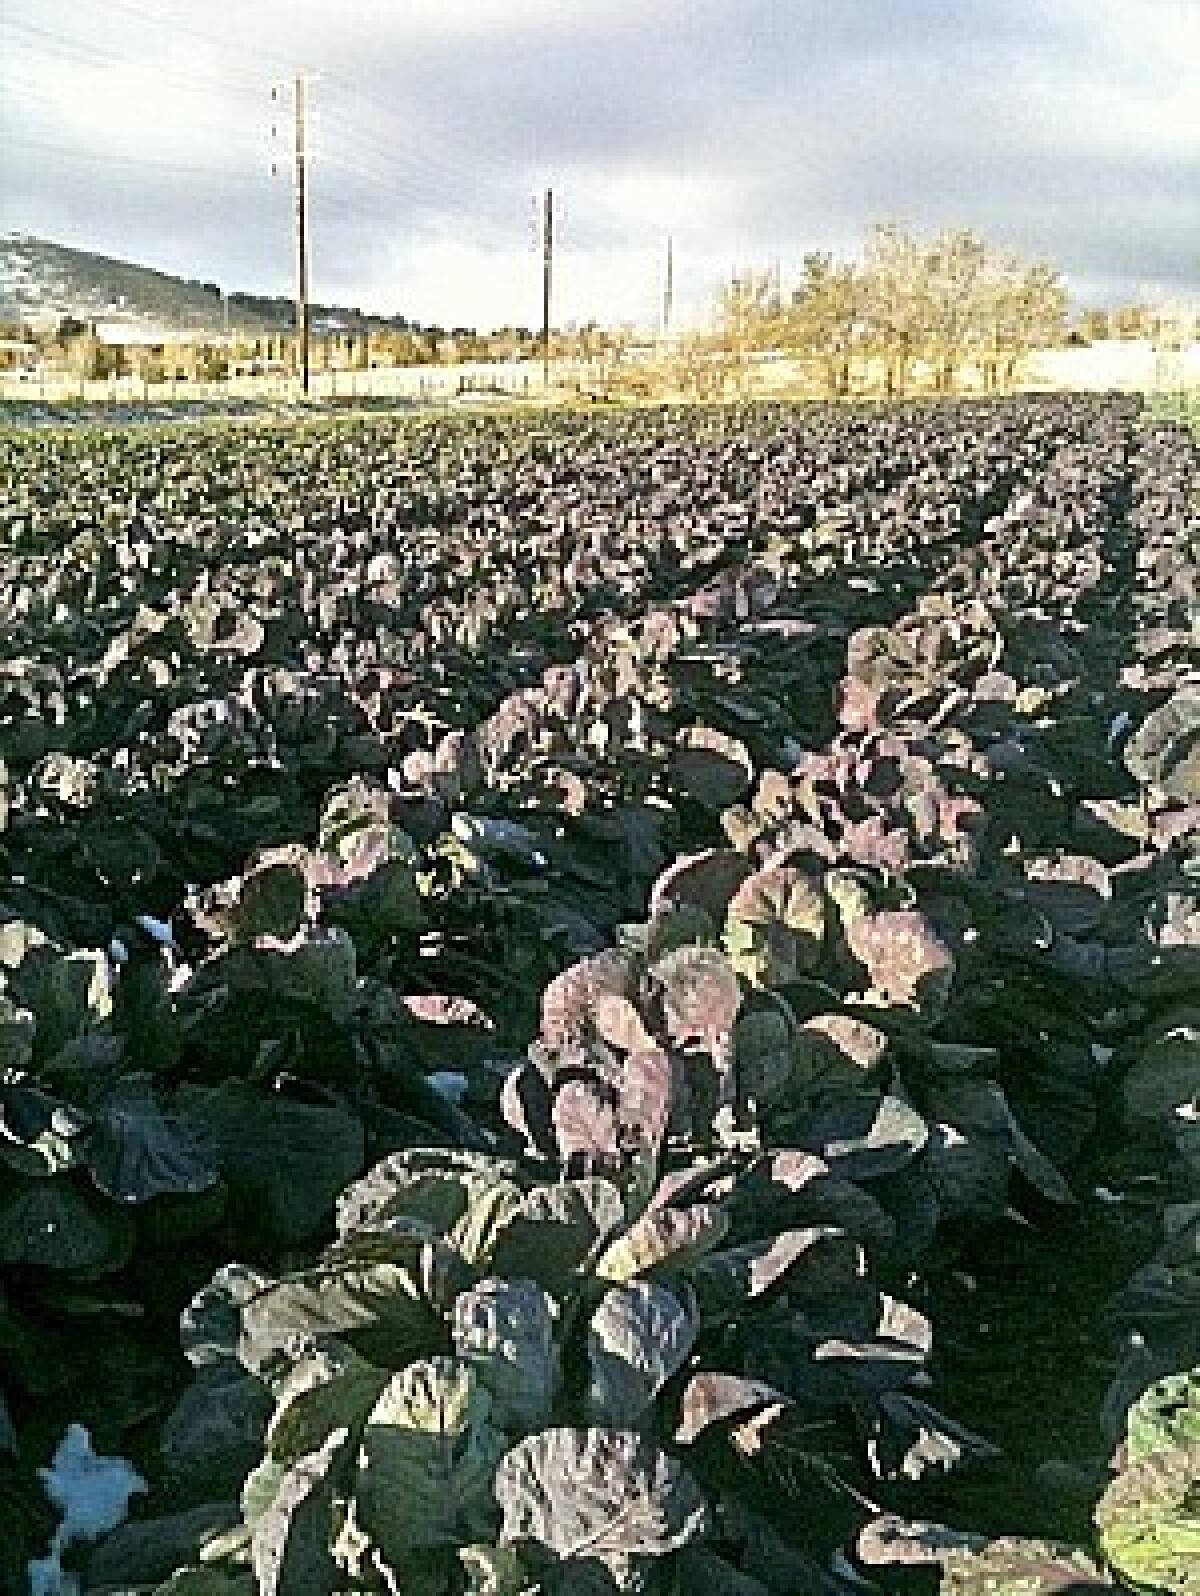 Rubine red brussels sprouts grown by Weiser Family Farms in Tehachapi, Calif.